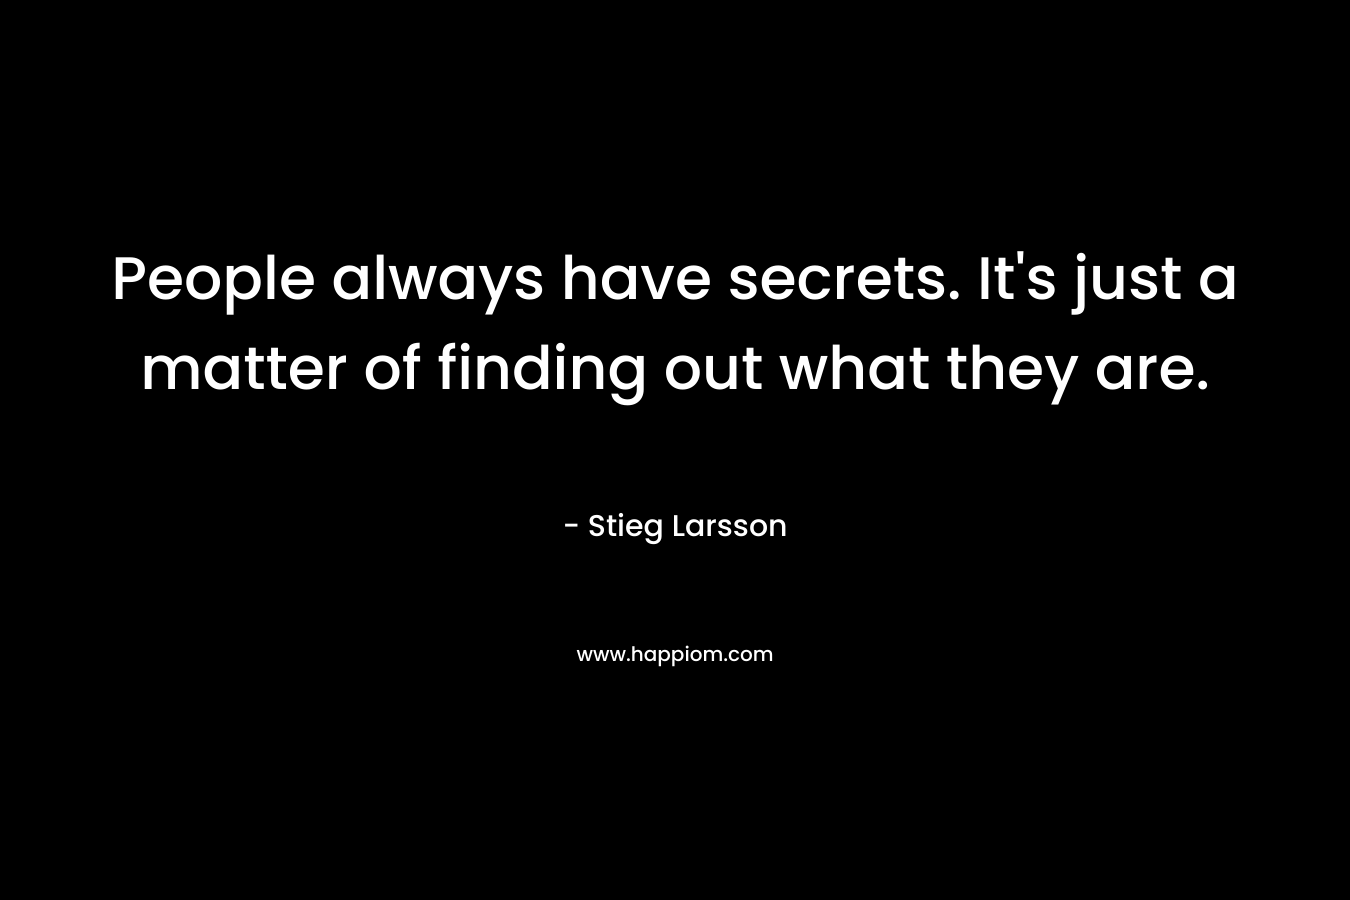 People always have secrets. It’s just a matter of finding out what they are. – Stieg Larsson